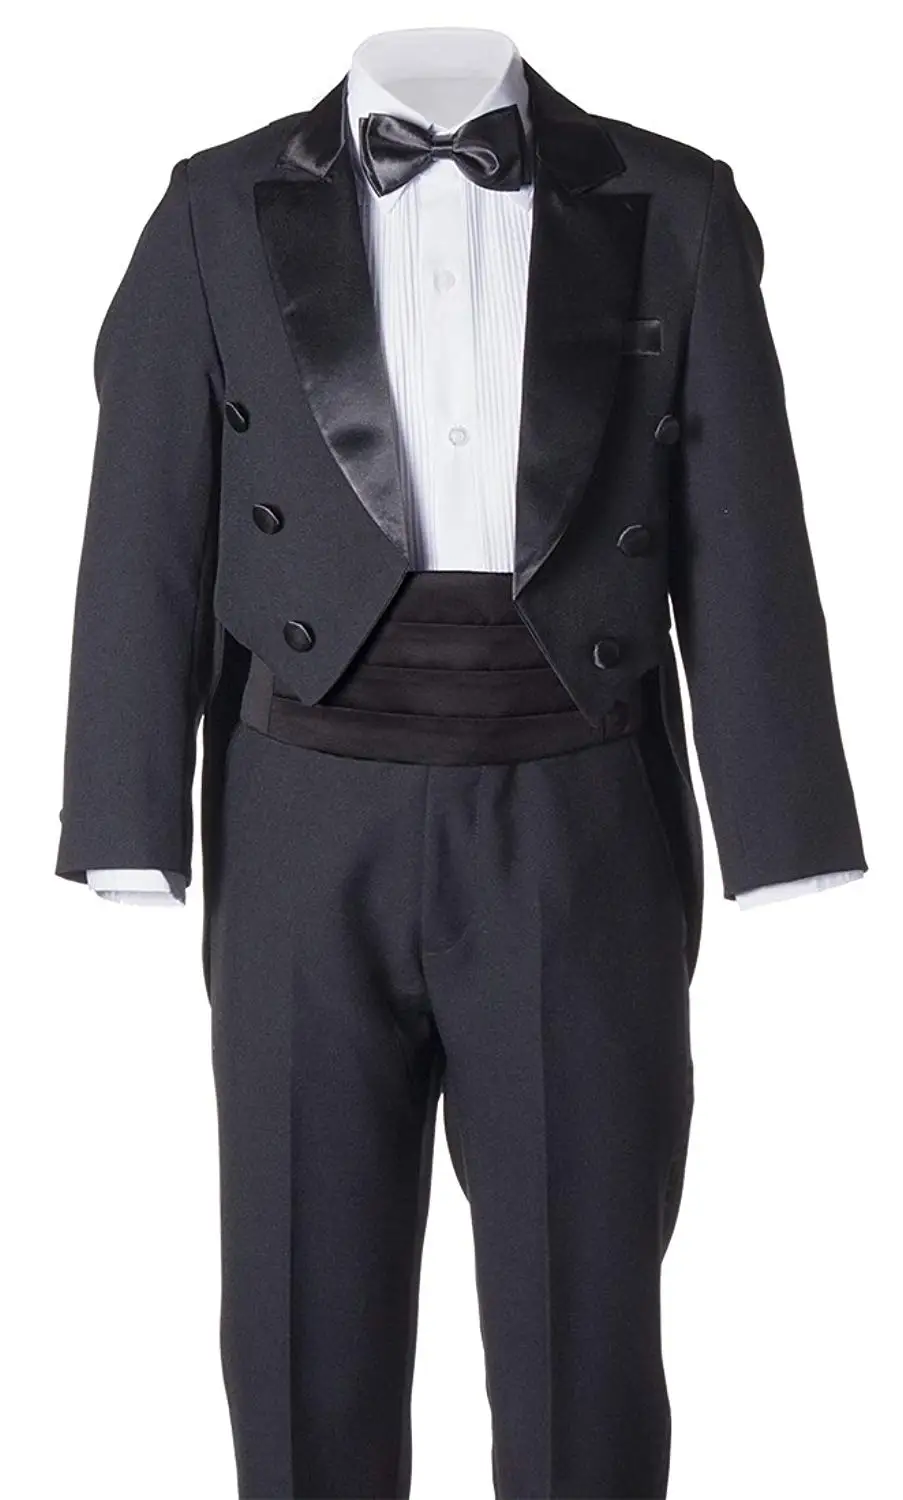 Cheap Tails Tuxedo, find Tails Tuxedo deals on line at Alibaba.com